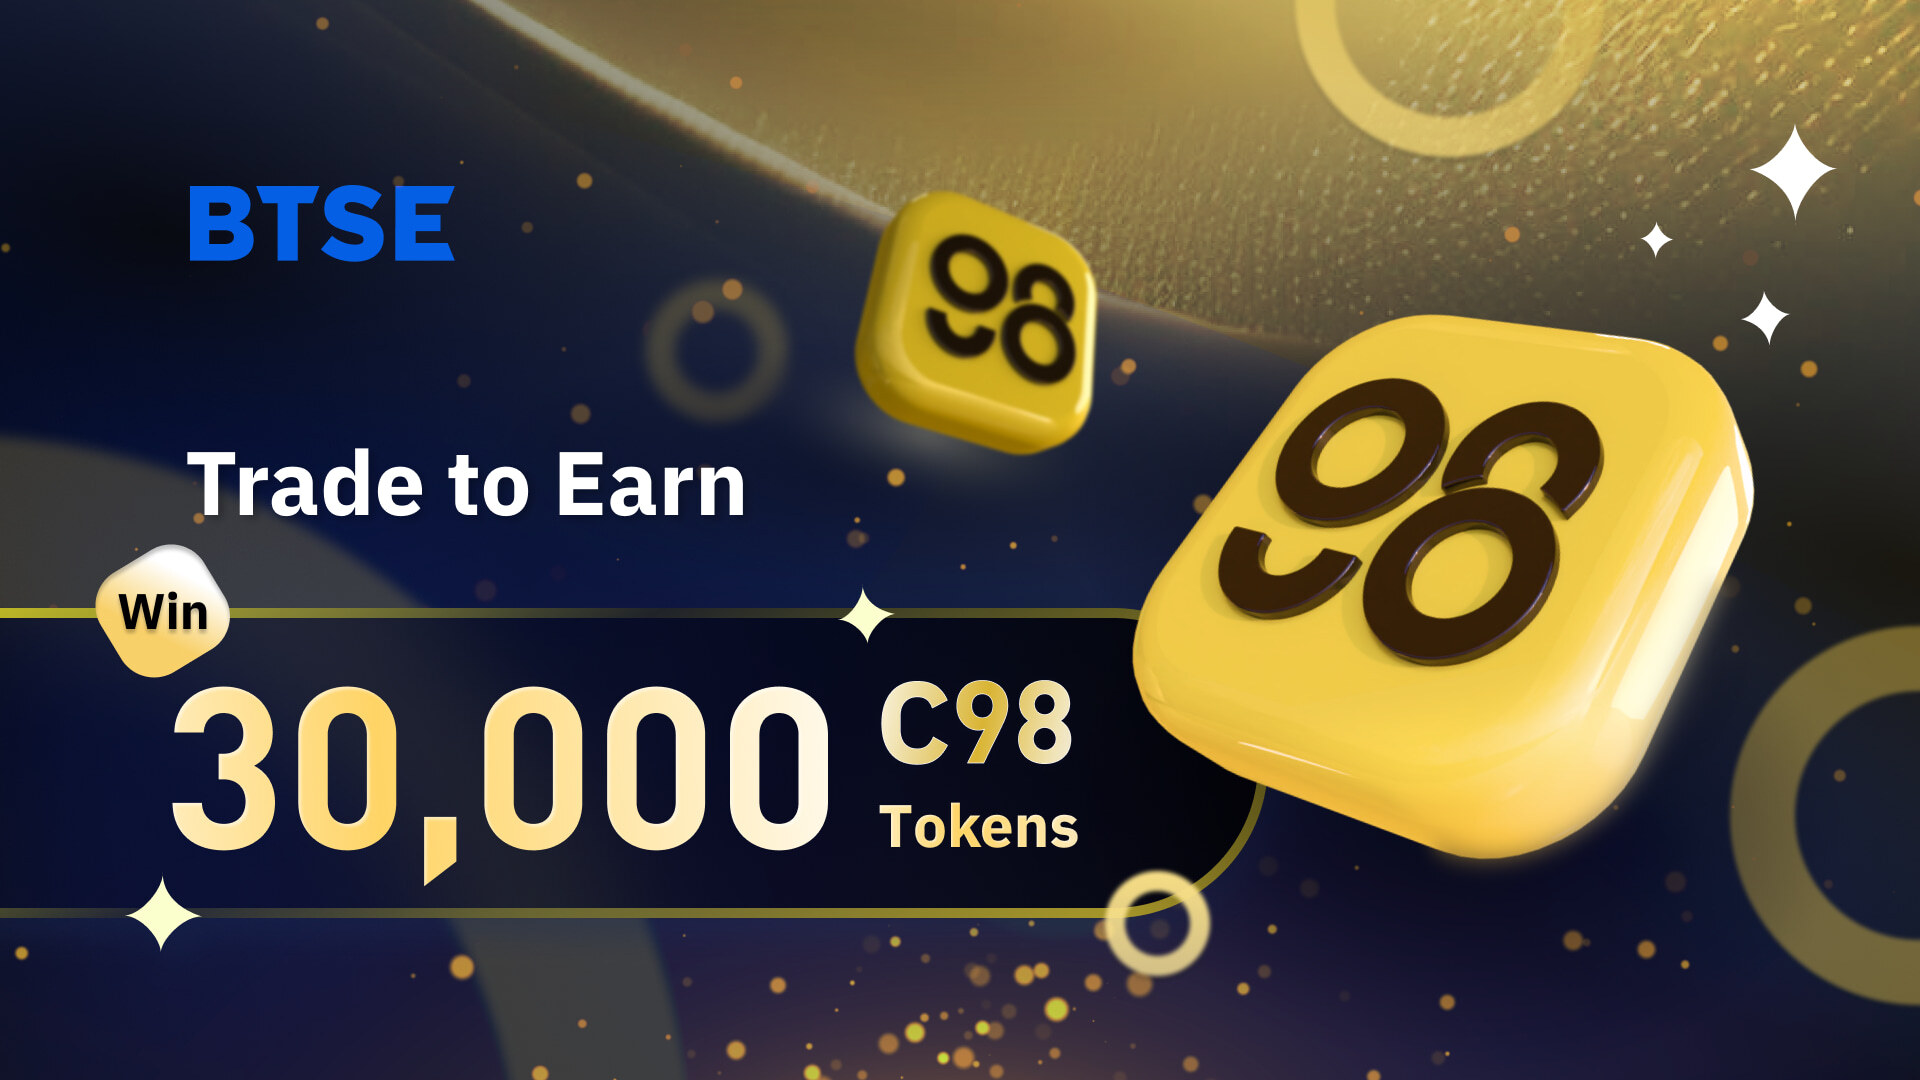 Trade C98 and Secure Your Opportunity to Win More Tokens!